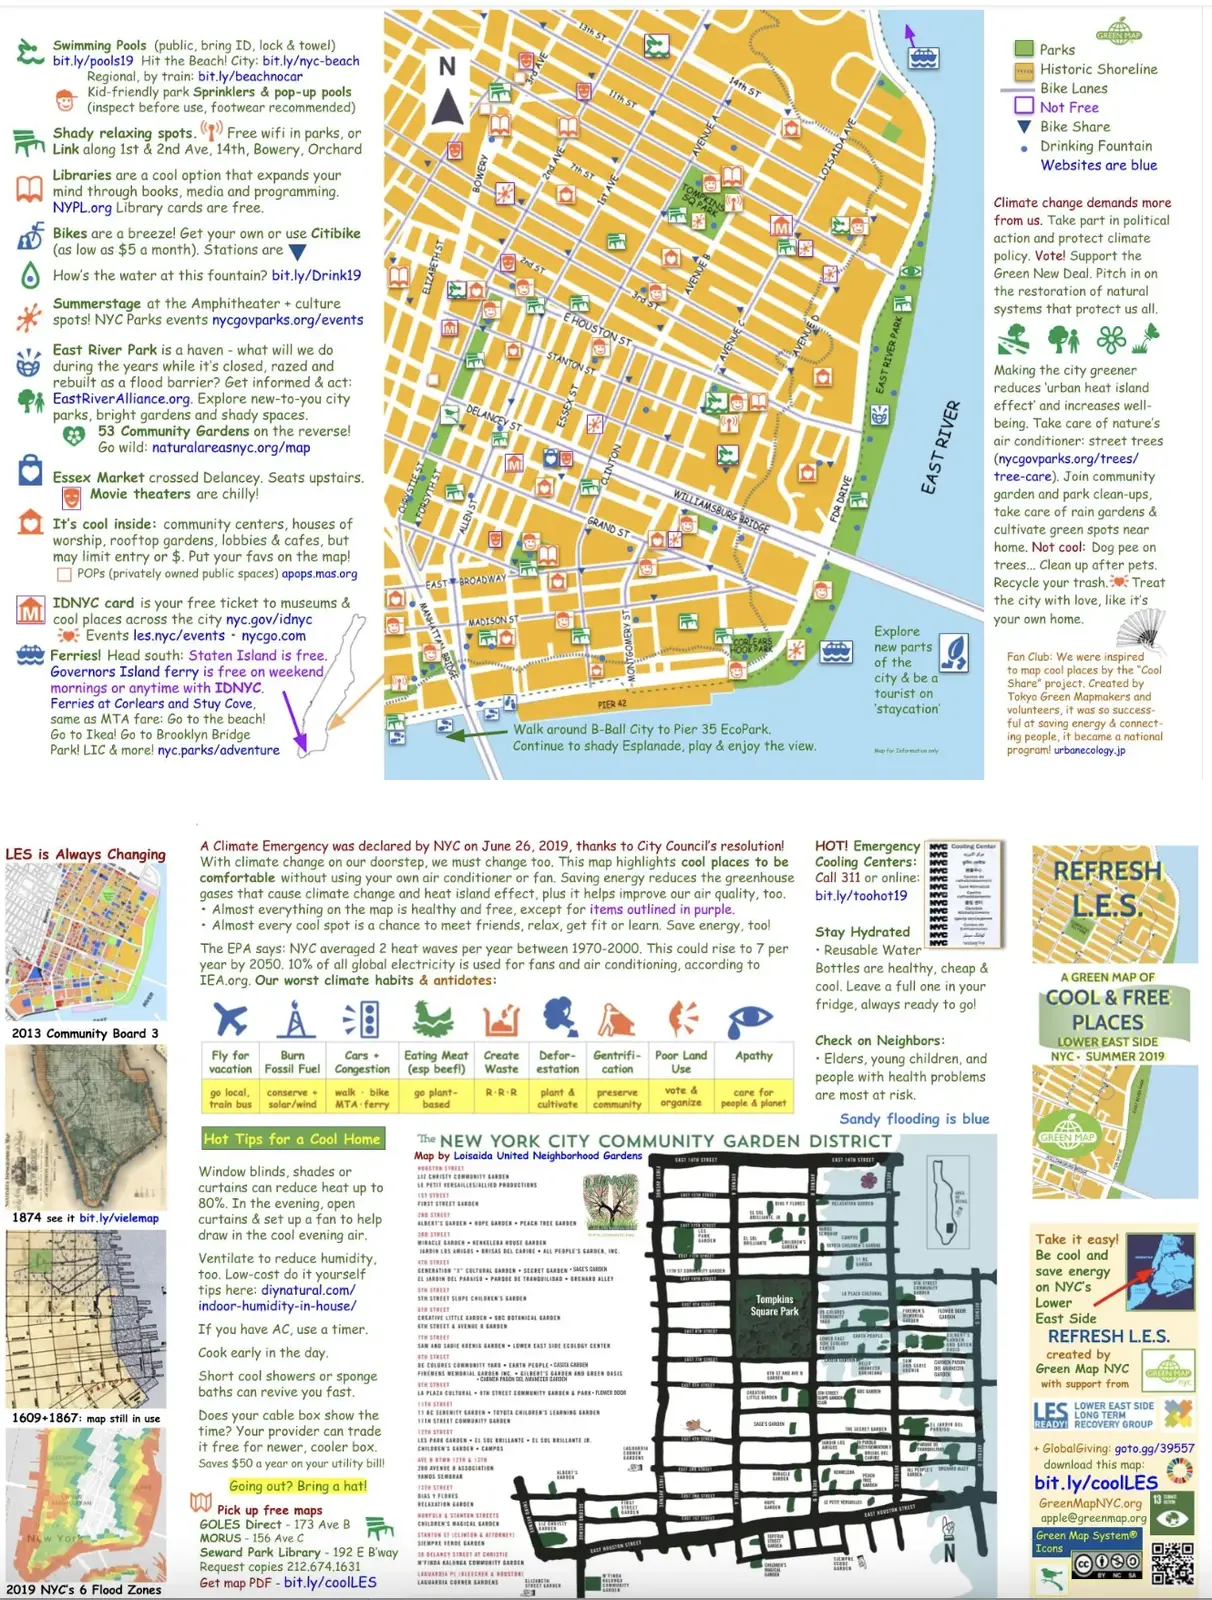 The Healthy Cool &amp; Free Green Map of the Lower East Side